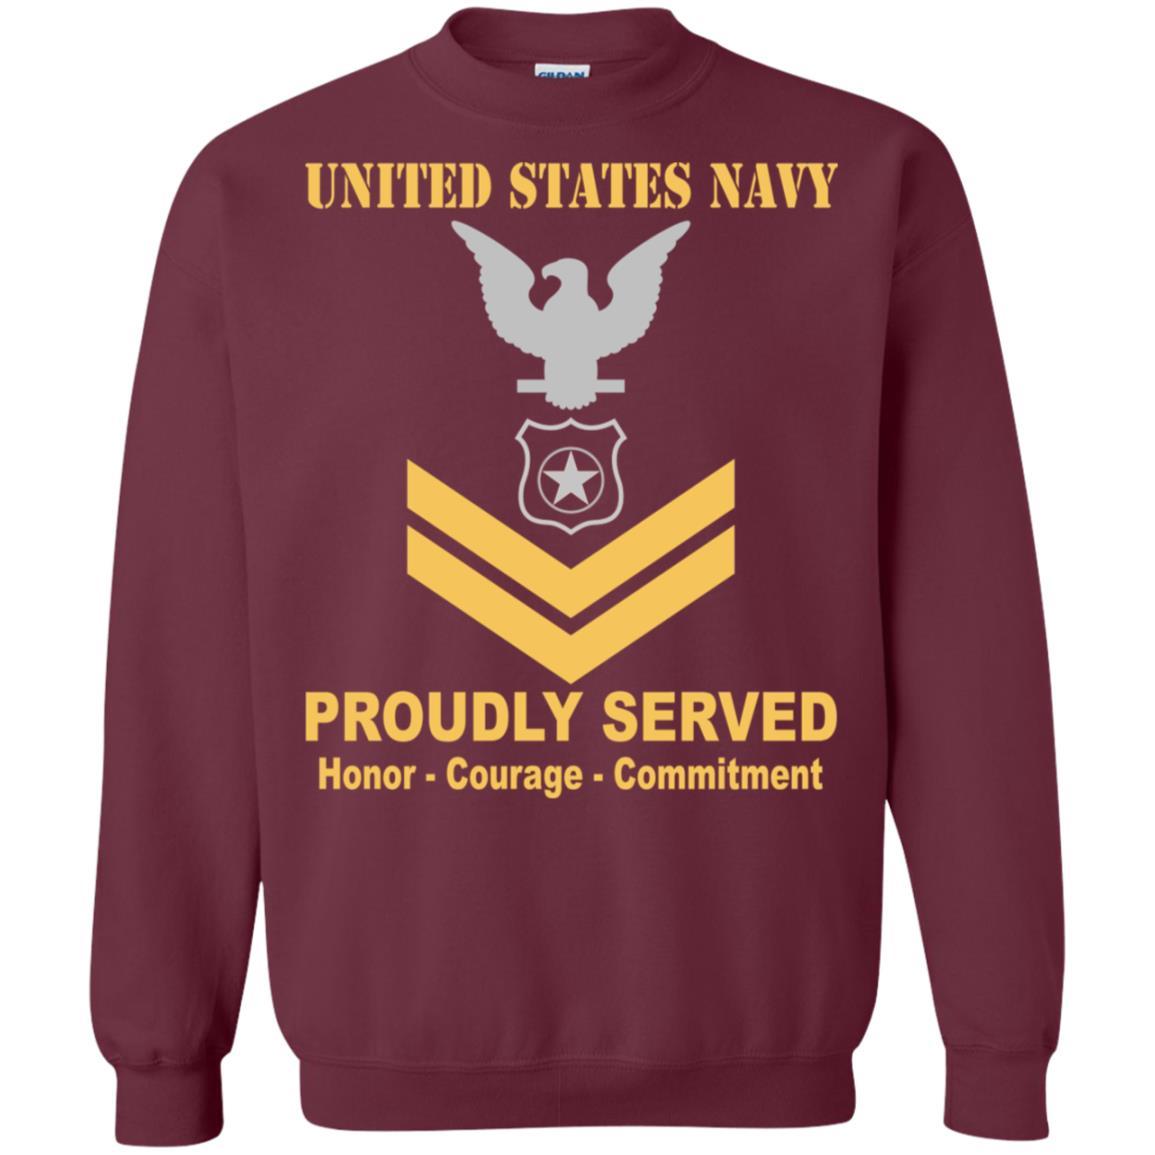 U.S Navy Master-at-arms Navy MA E-5 Rating Badges Proudly Served T-Shirt For Men On Front-TShirt-Navy-Veterans Nation